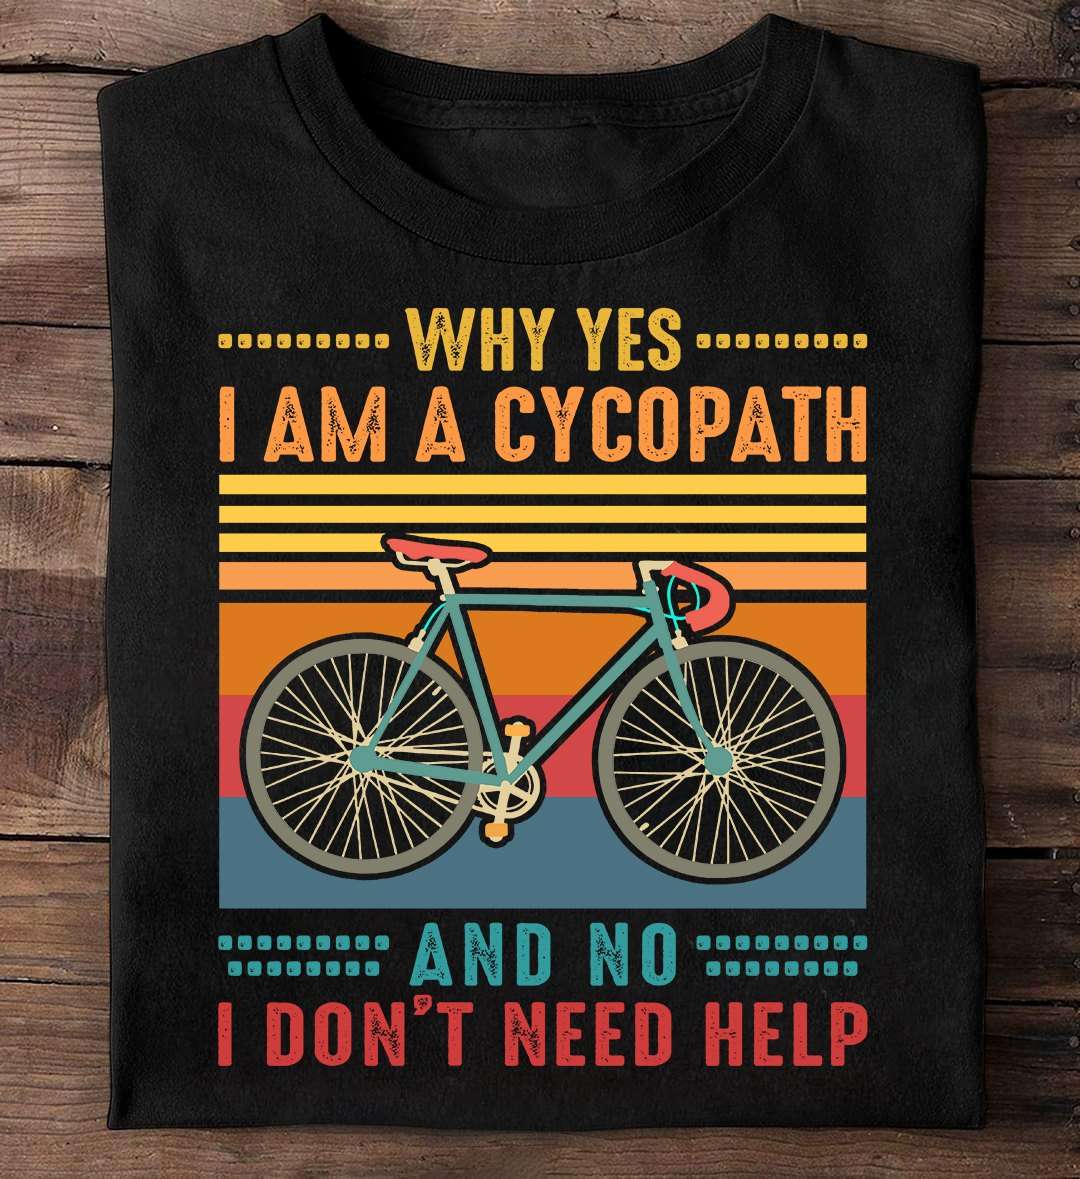 Why yes I am a cycopath and no I don't need help - Love riding bicycle, cycopath biker gift